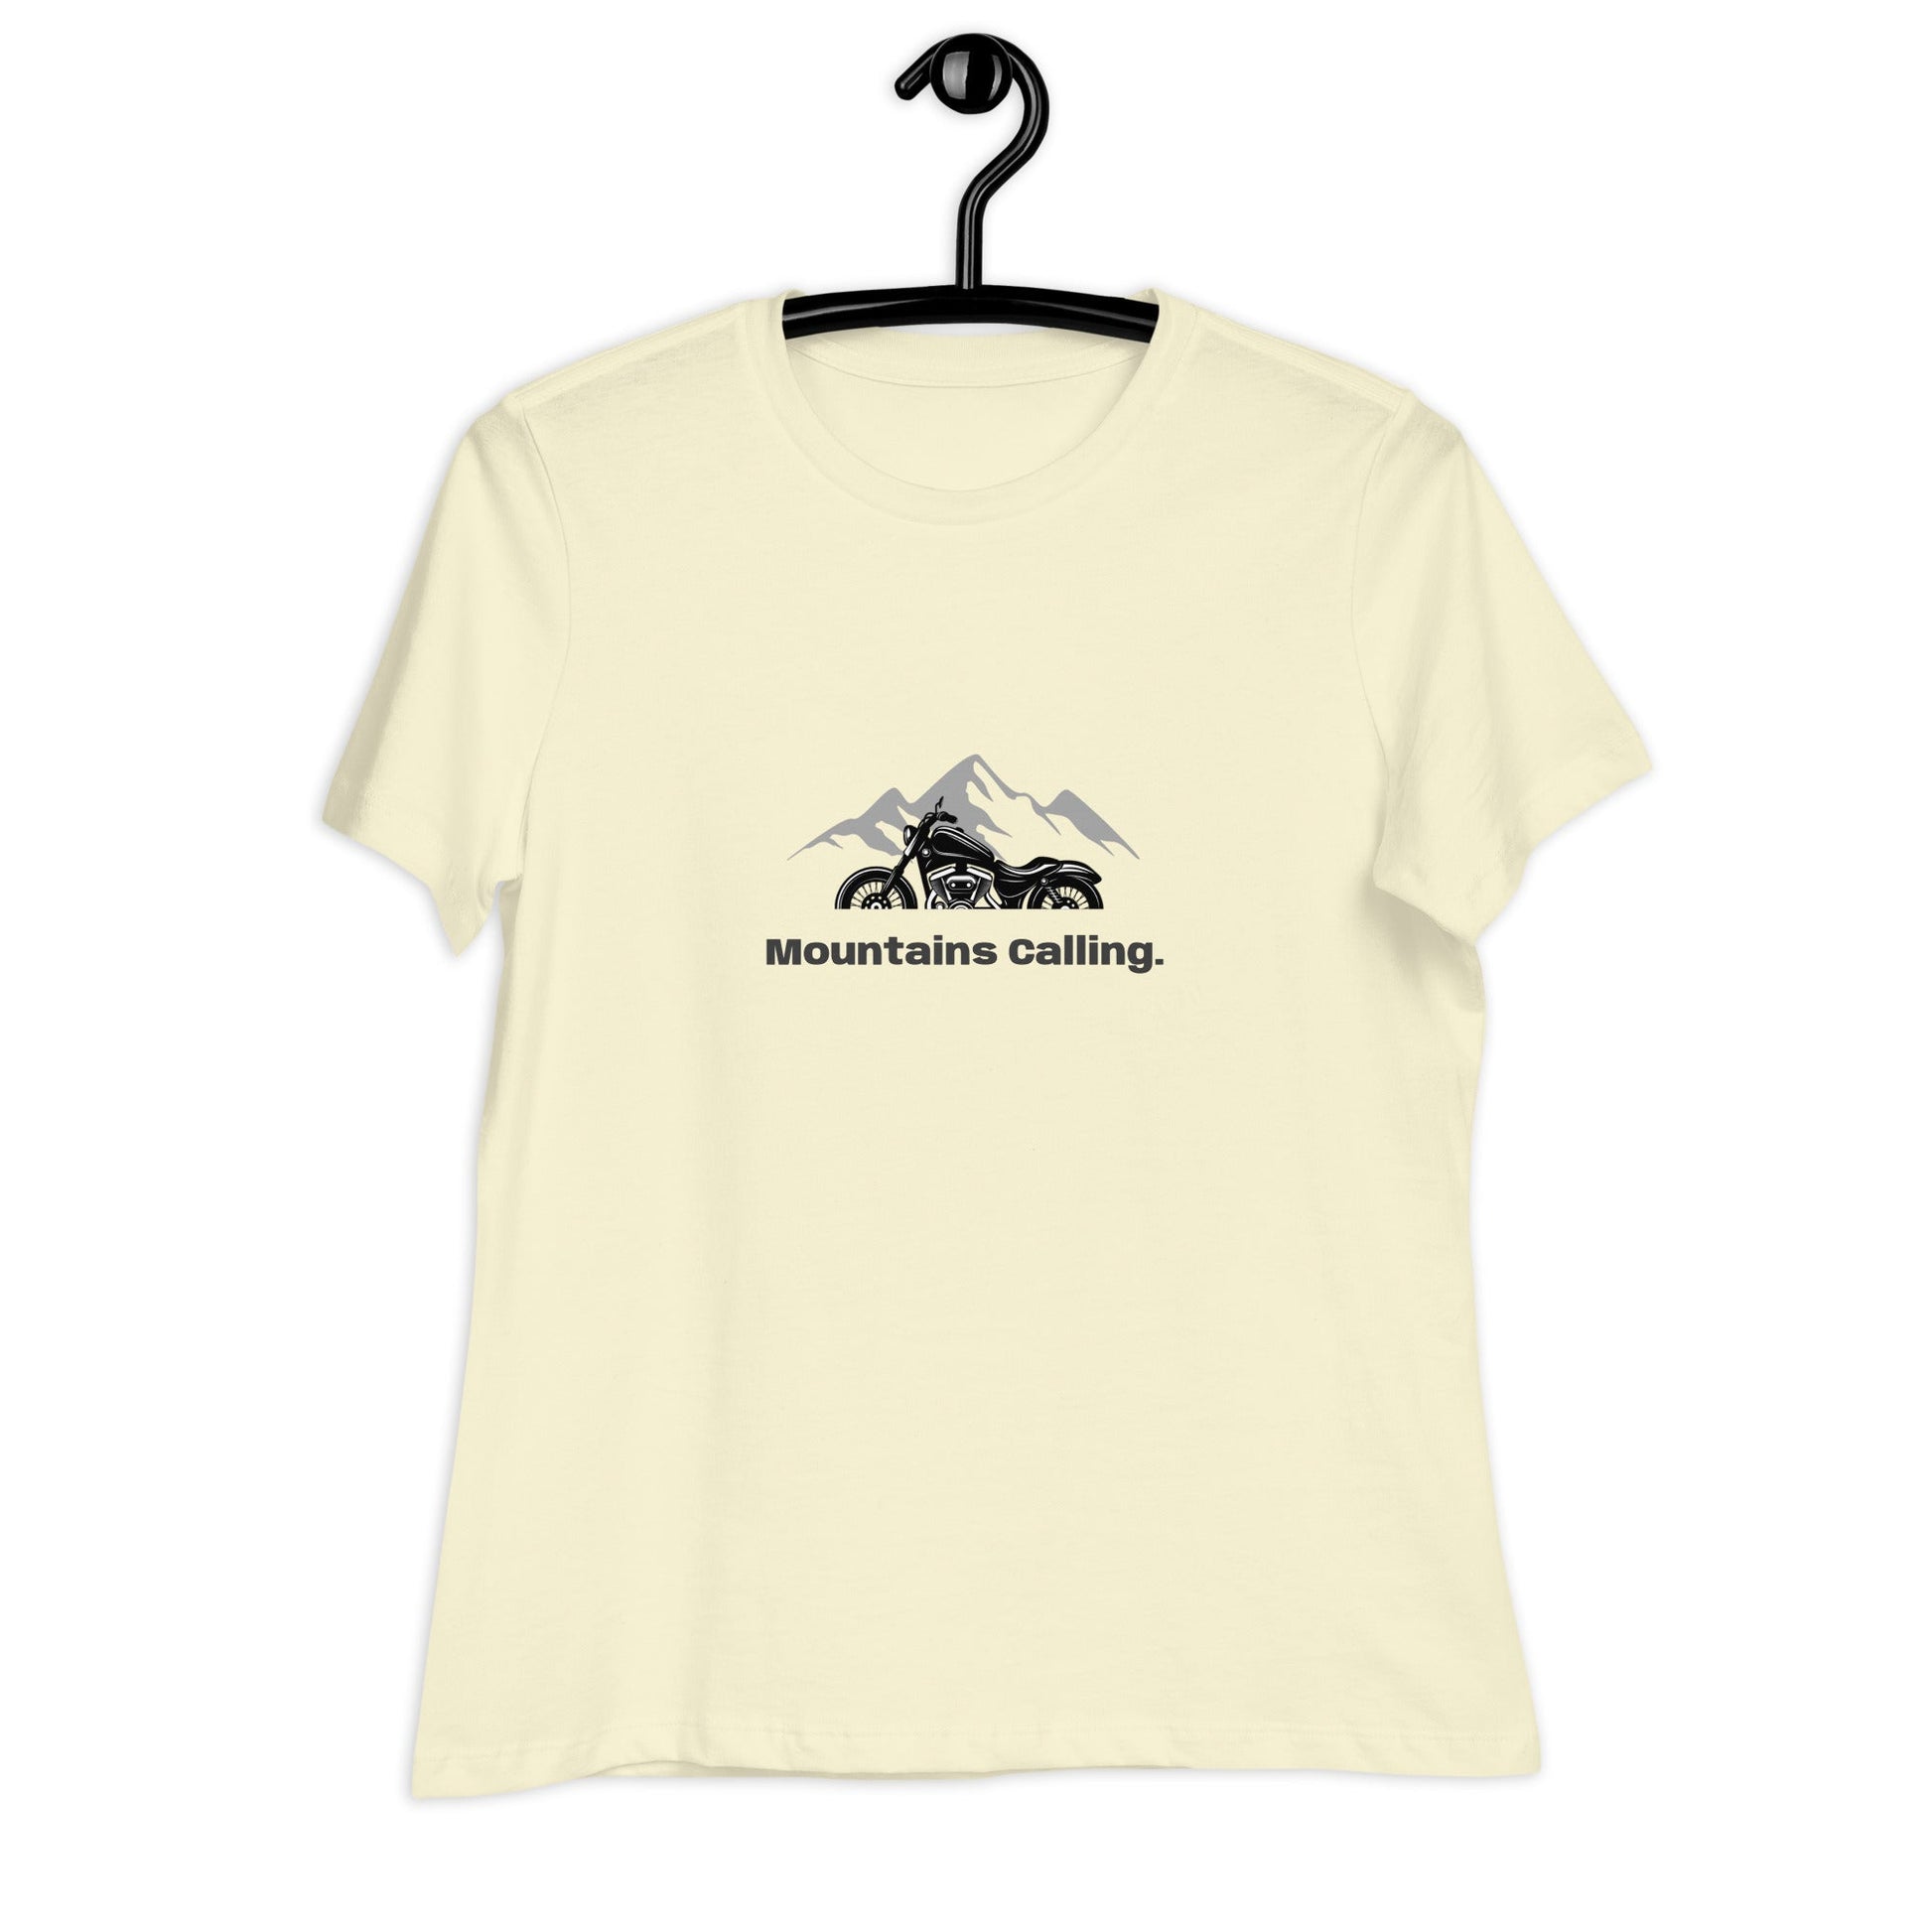 Women's Relaxed T-Shirt - Mountains Calling - The Vandi Company